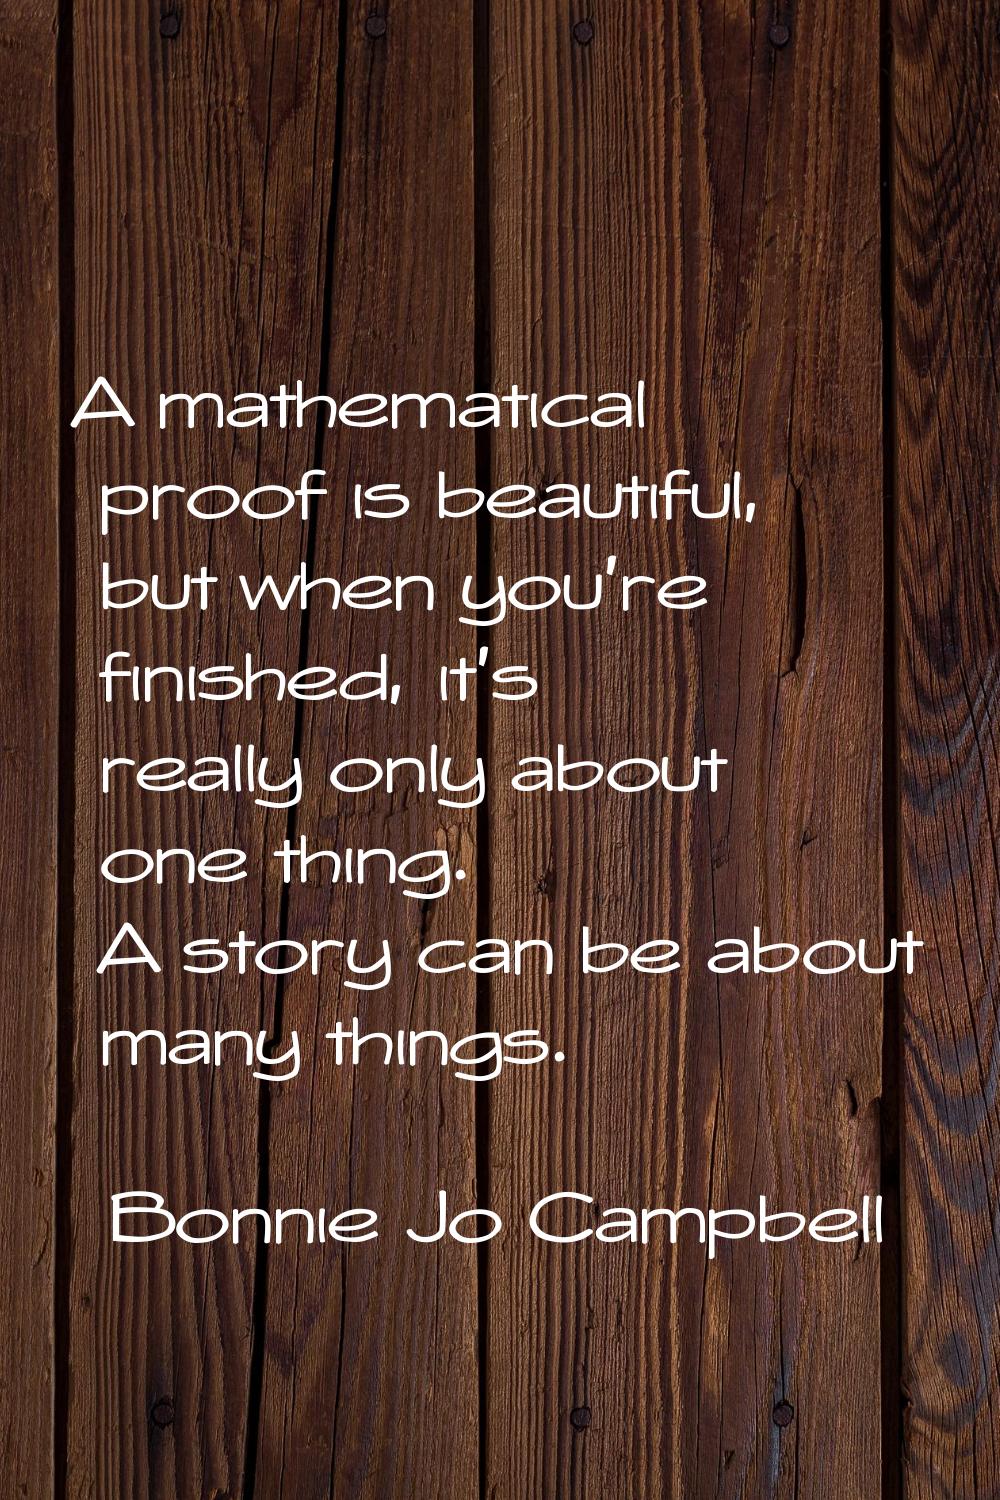 A mathematical proof is beautiful, but when you're finished, it's really only about one thing. A st